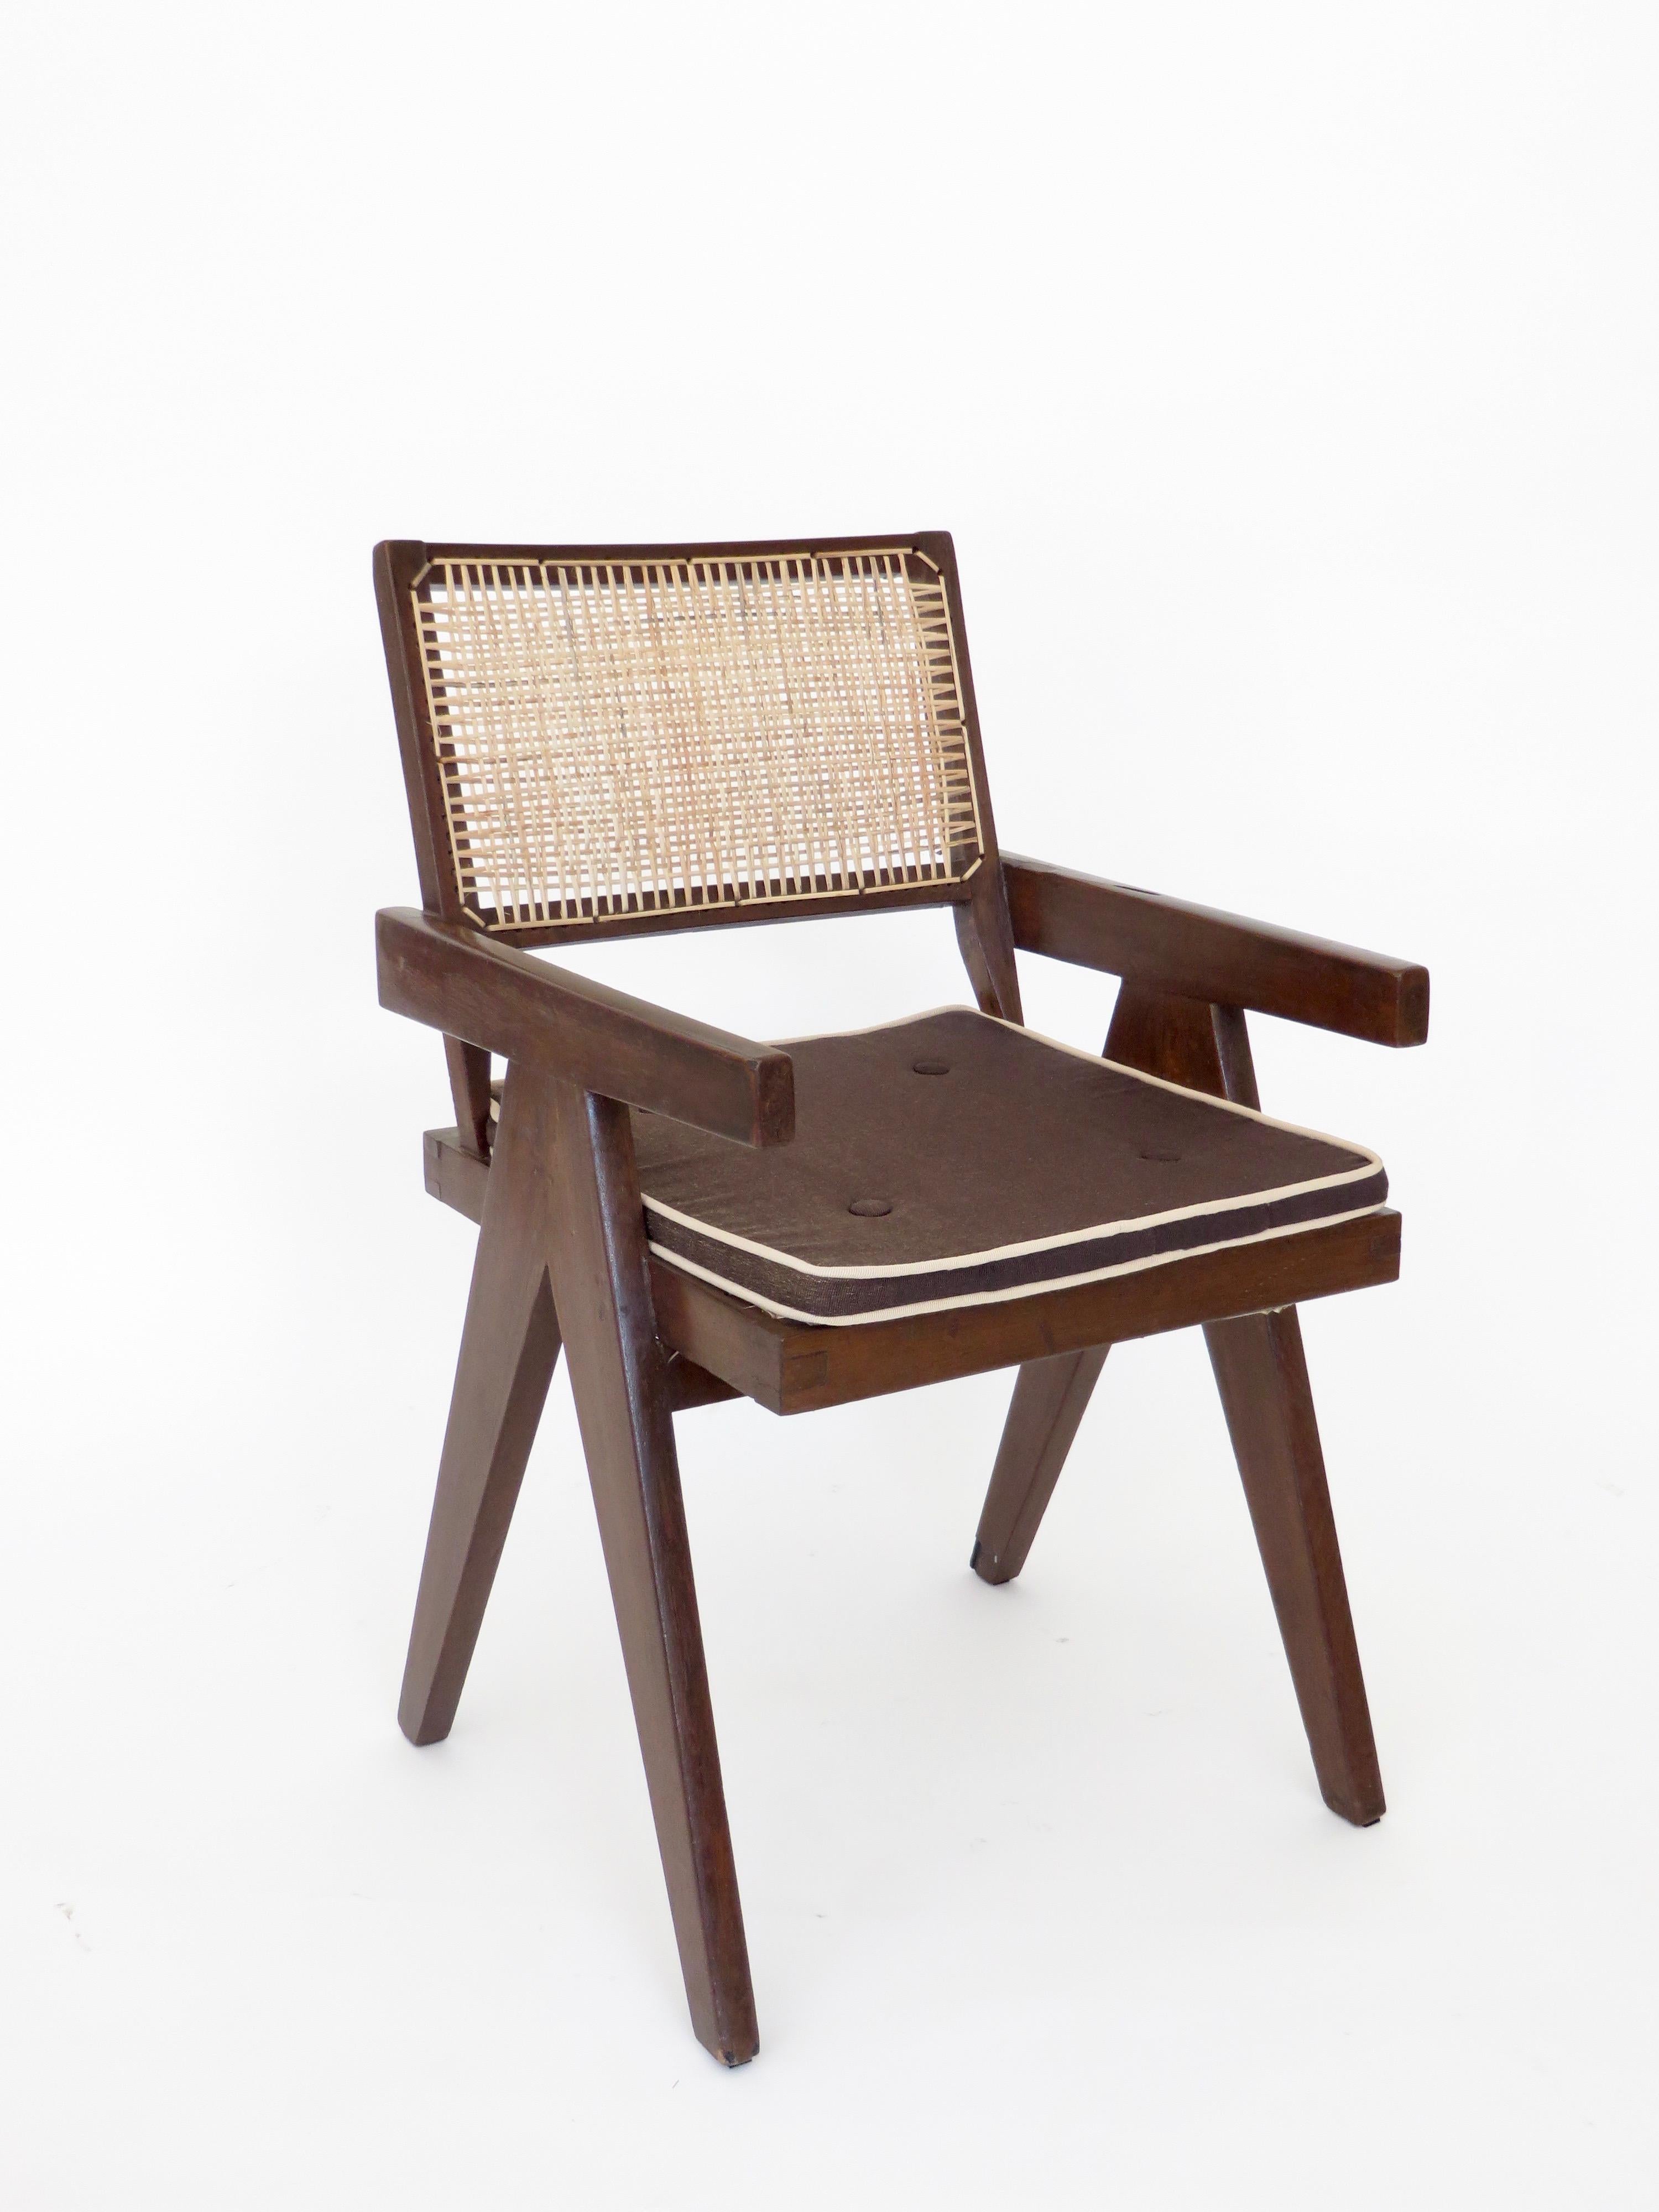 A single armchair called office cane chair by Pierre Jeanneret (1896-1967) from Chandigarh.
In teak with cushion and with bended and slightly curved back.
Cane seat and back, circa 1956. New caning. All of these chairs from Chandigarh have new